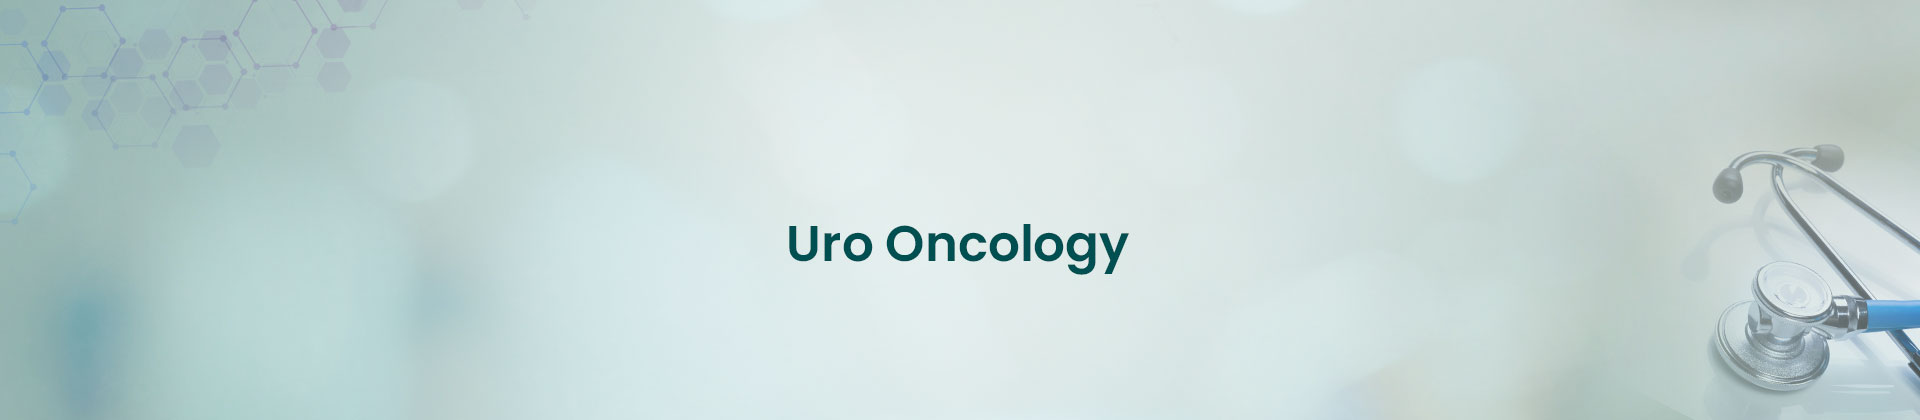 Uro Oncology